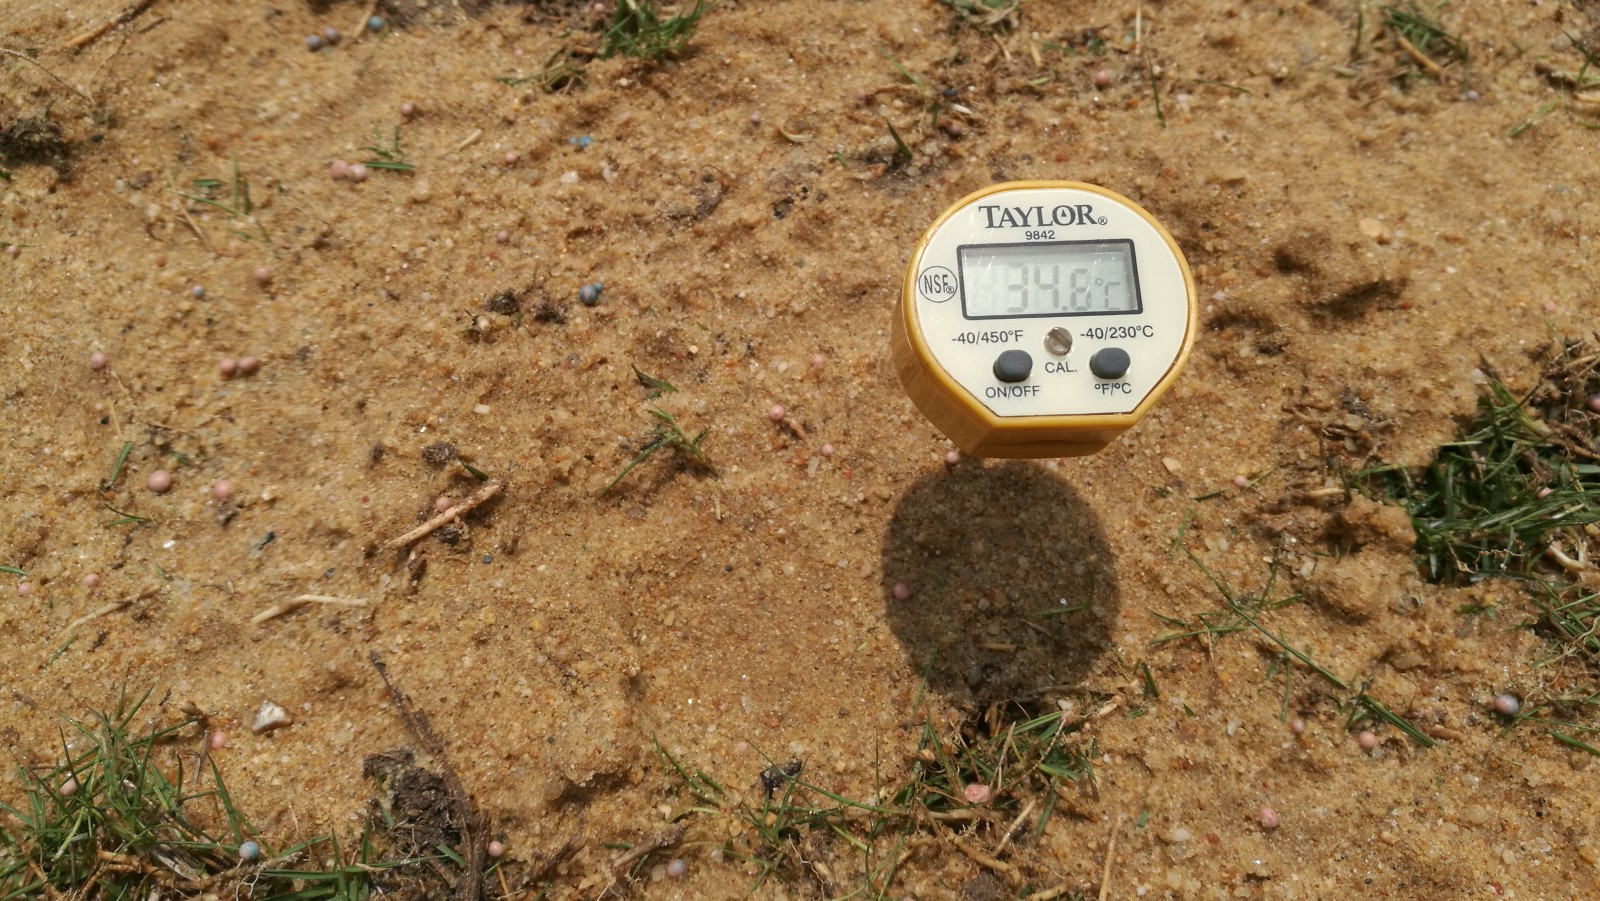 soil temperature at 11 a.m. on 22 April 2019 in Thailand